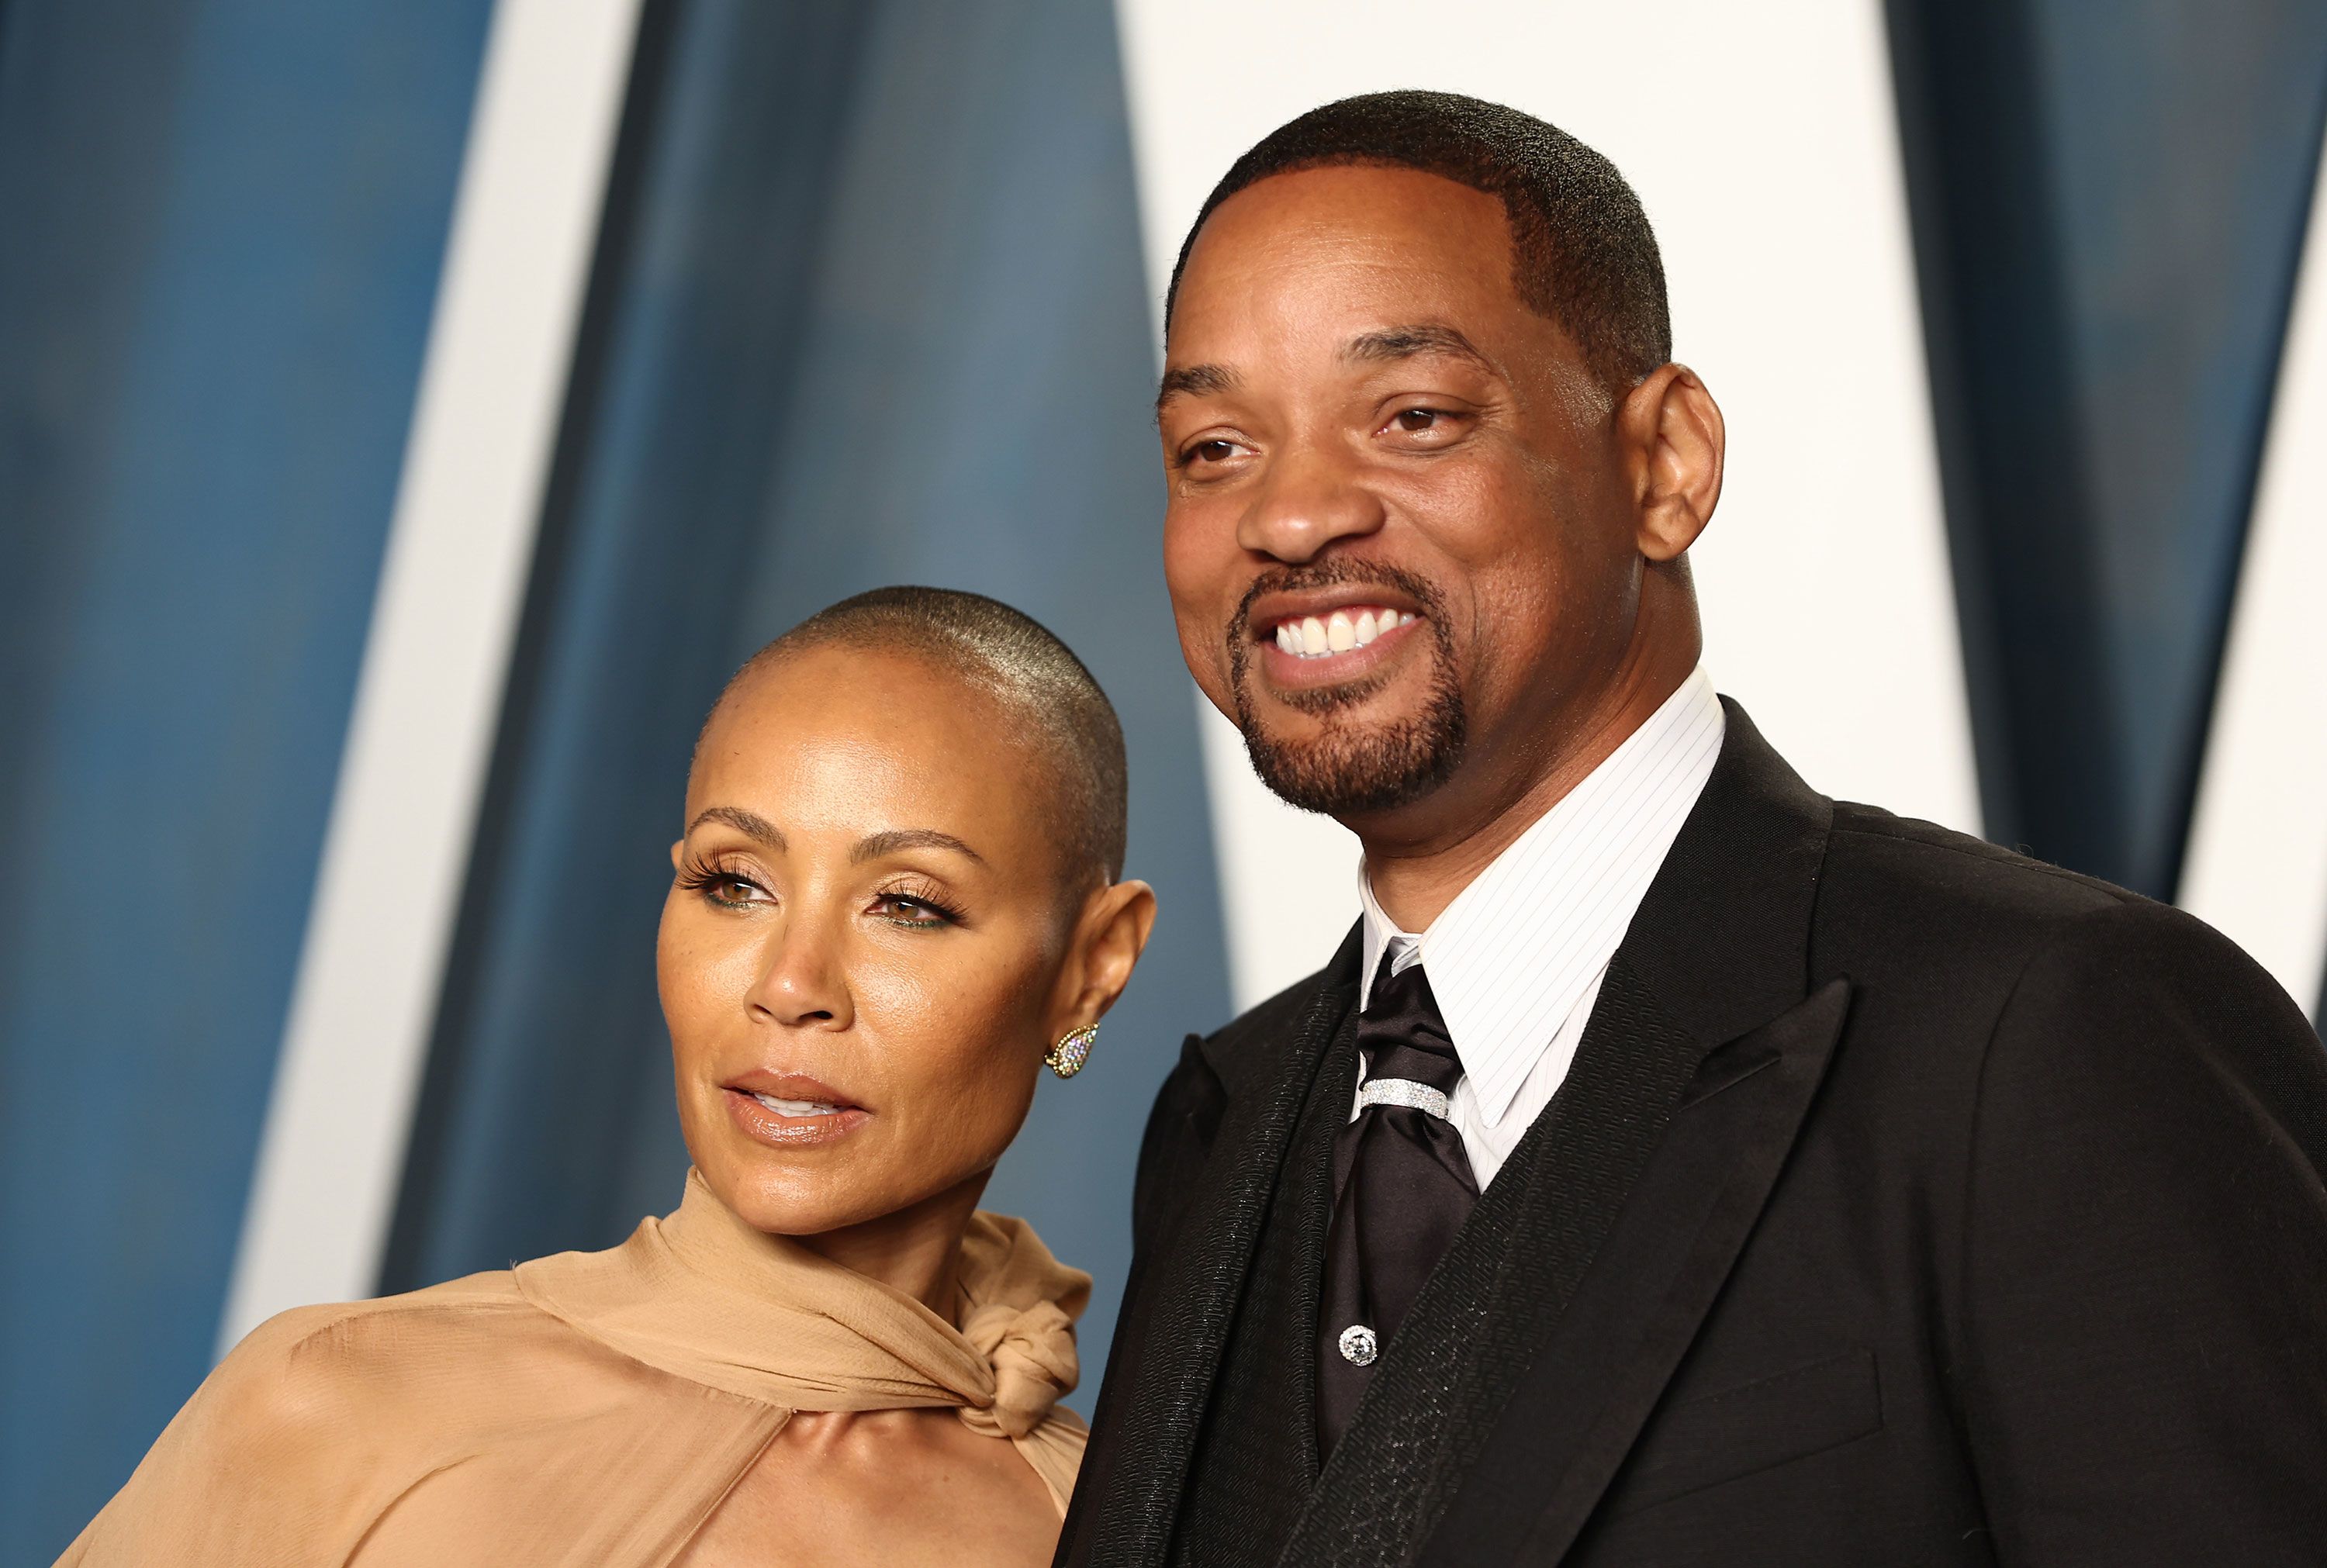 Will Smith and Jada Pinkett Smith: What they've said about their